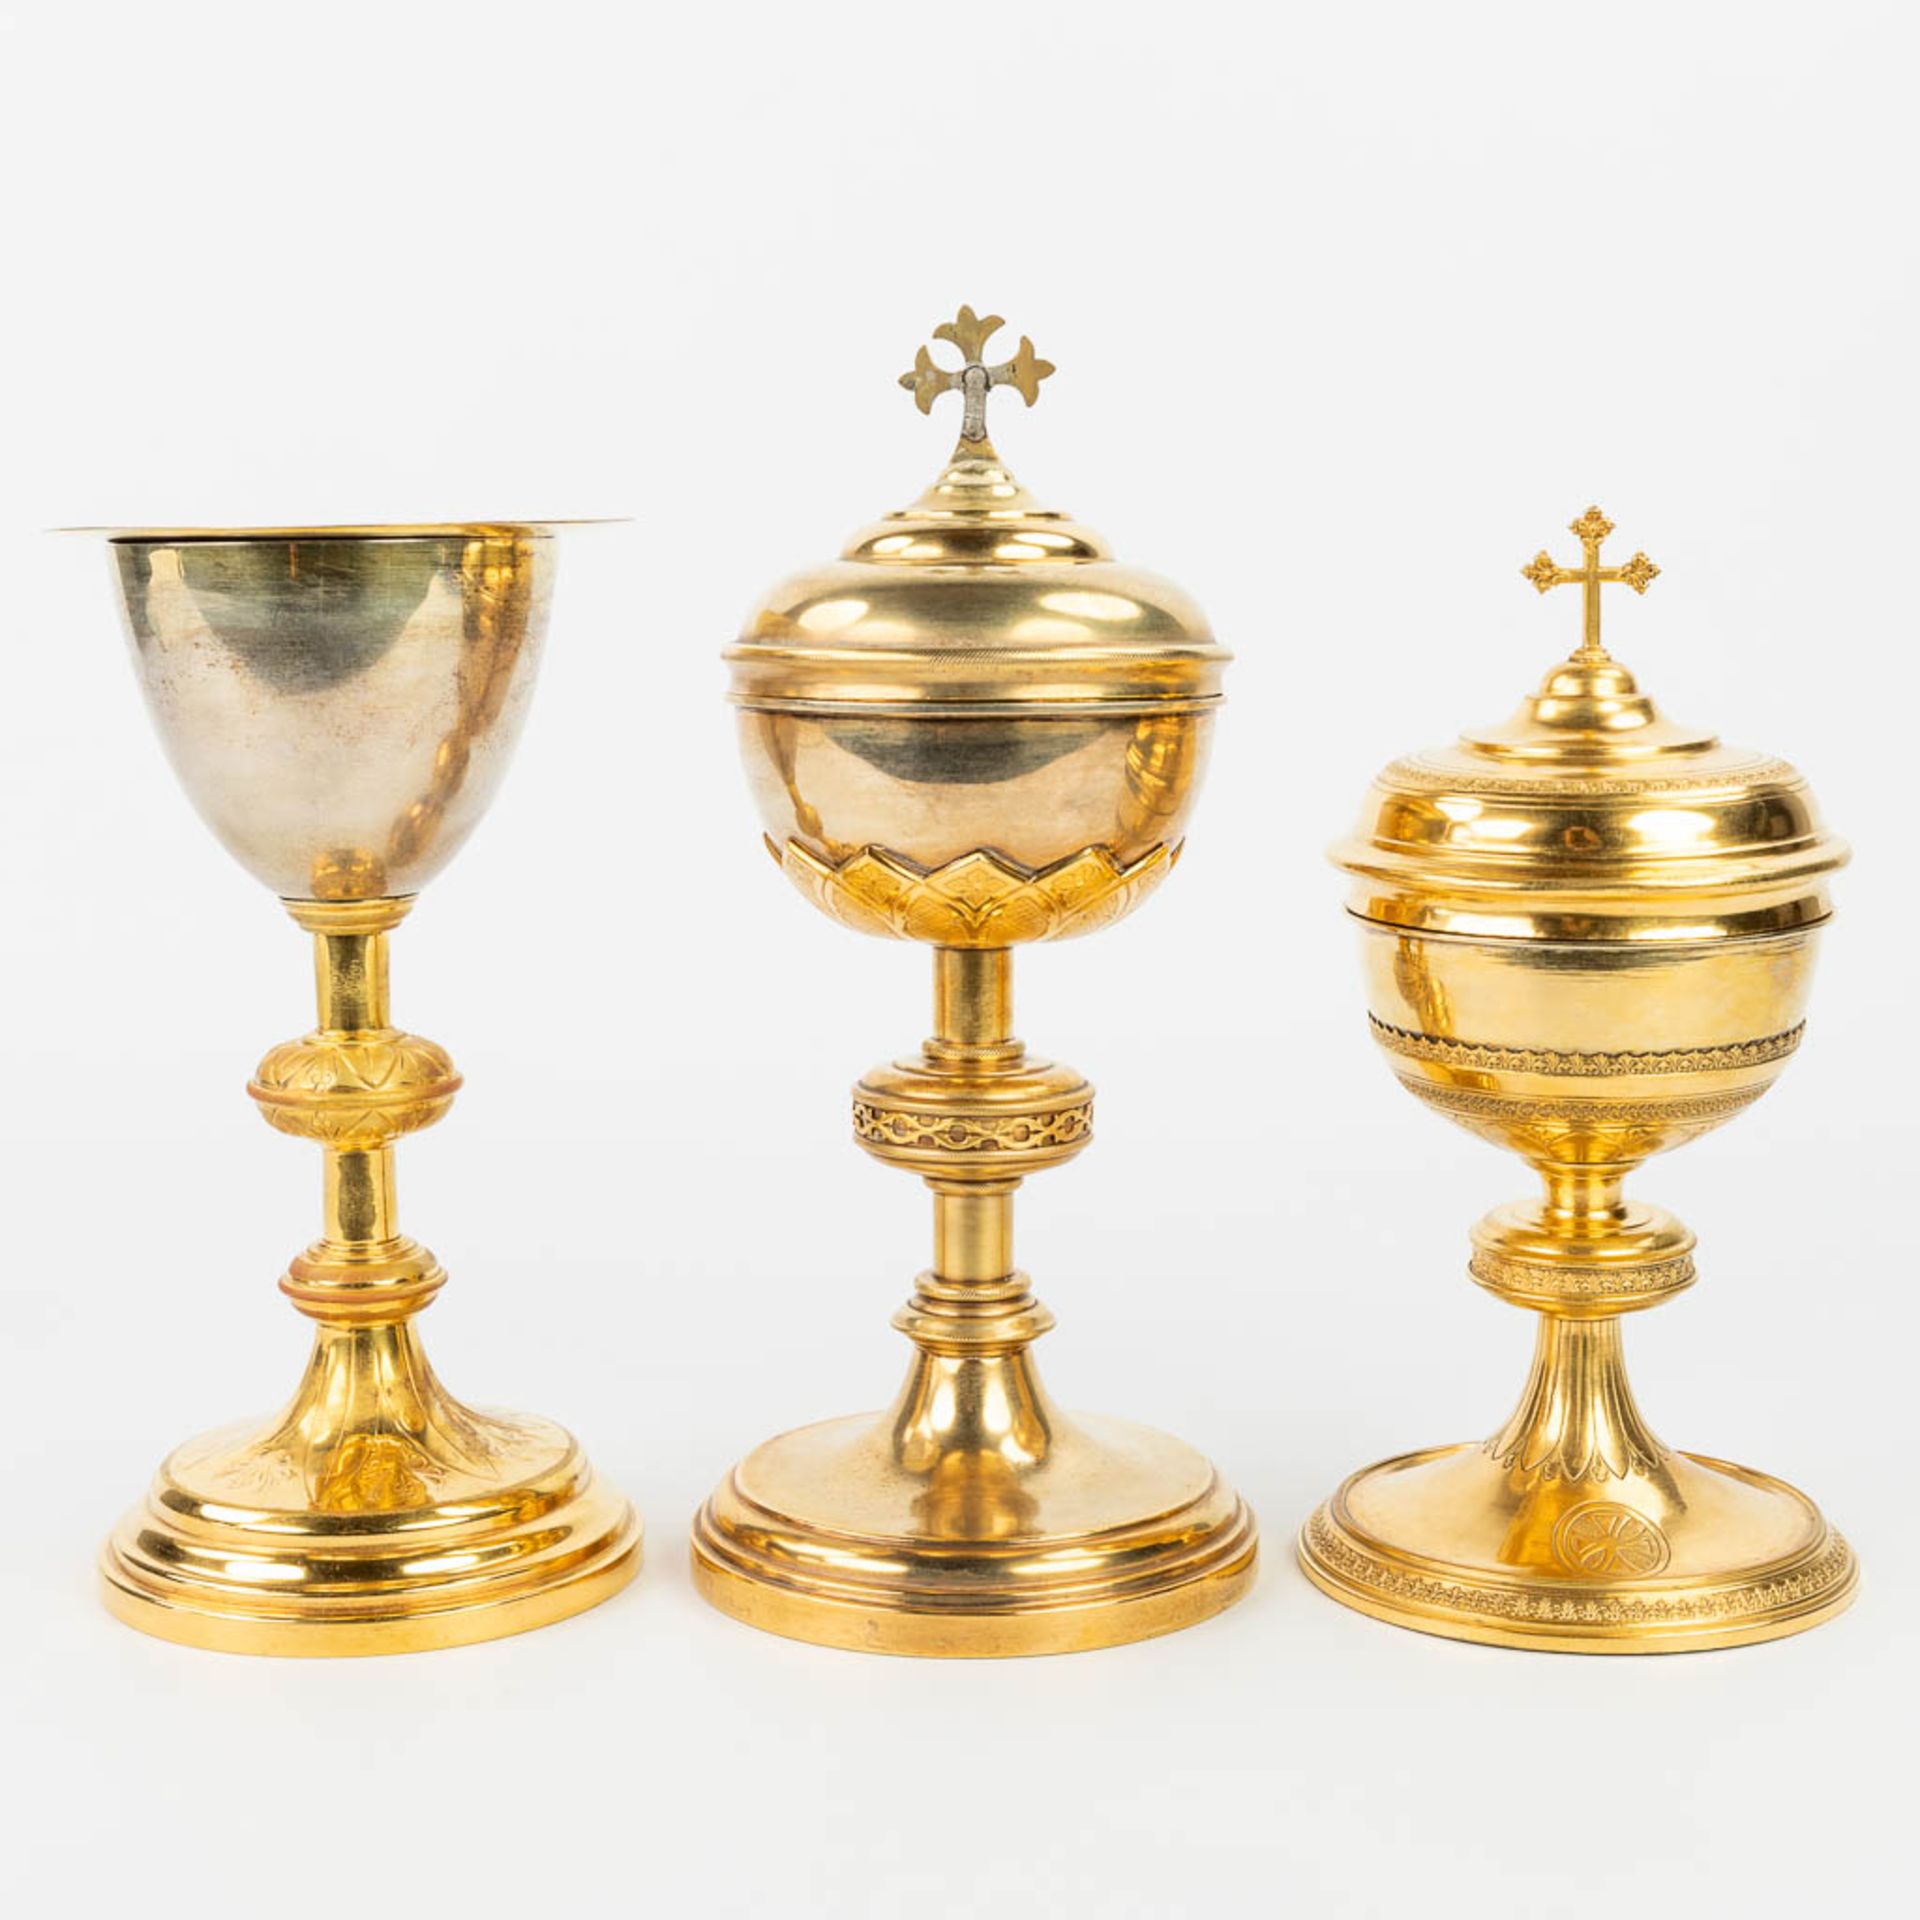 A collection of 4 large ciboria and a chalice made of silver and gold plated metal. - Image 12 of 24